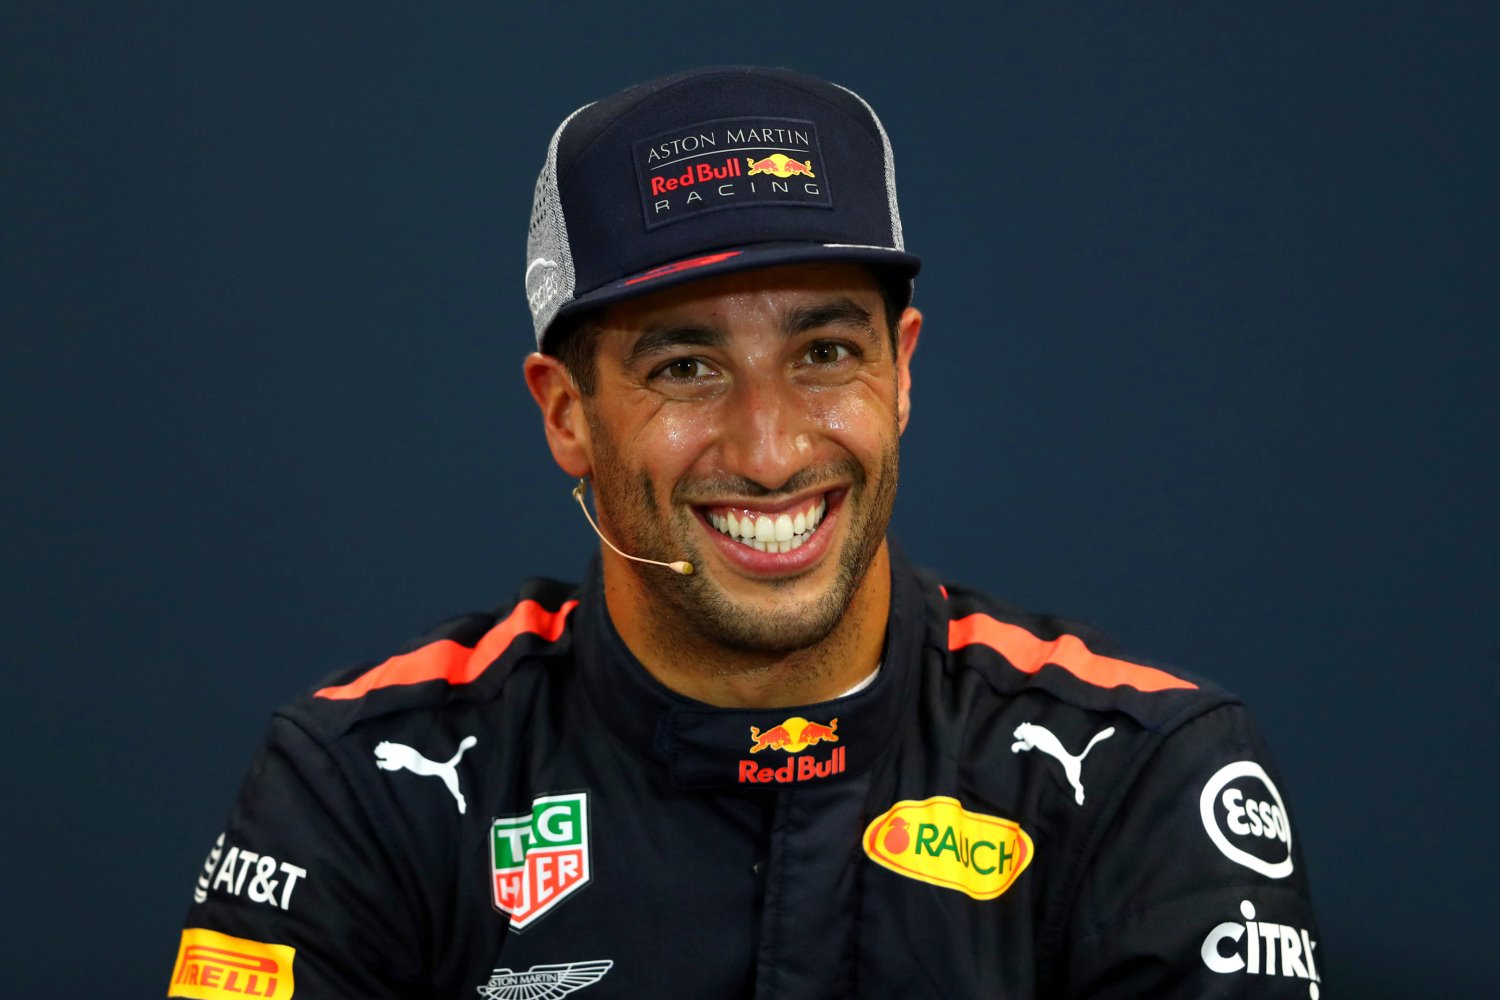 Hamilton wants Ricciardo to stay at Red Bull. He does not want a teammate who would beat him.